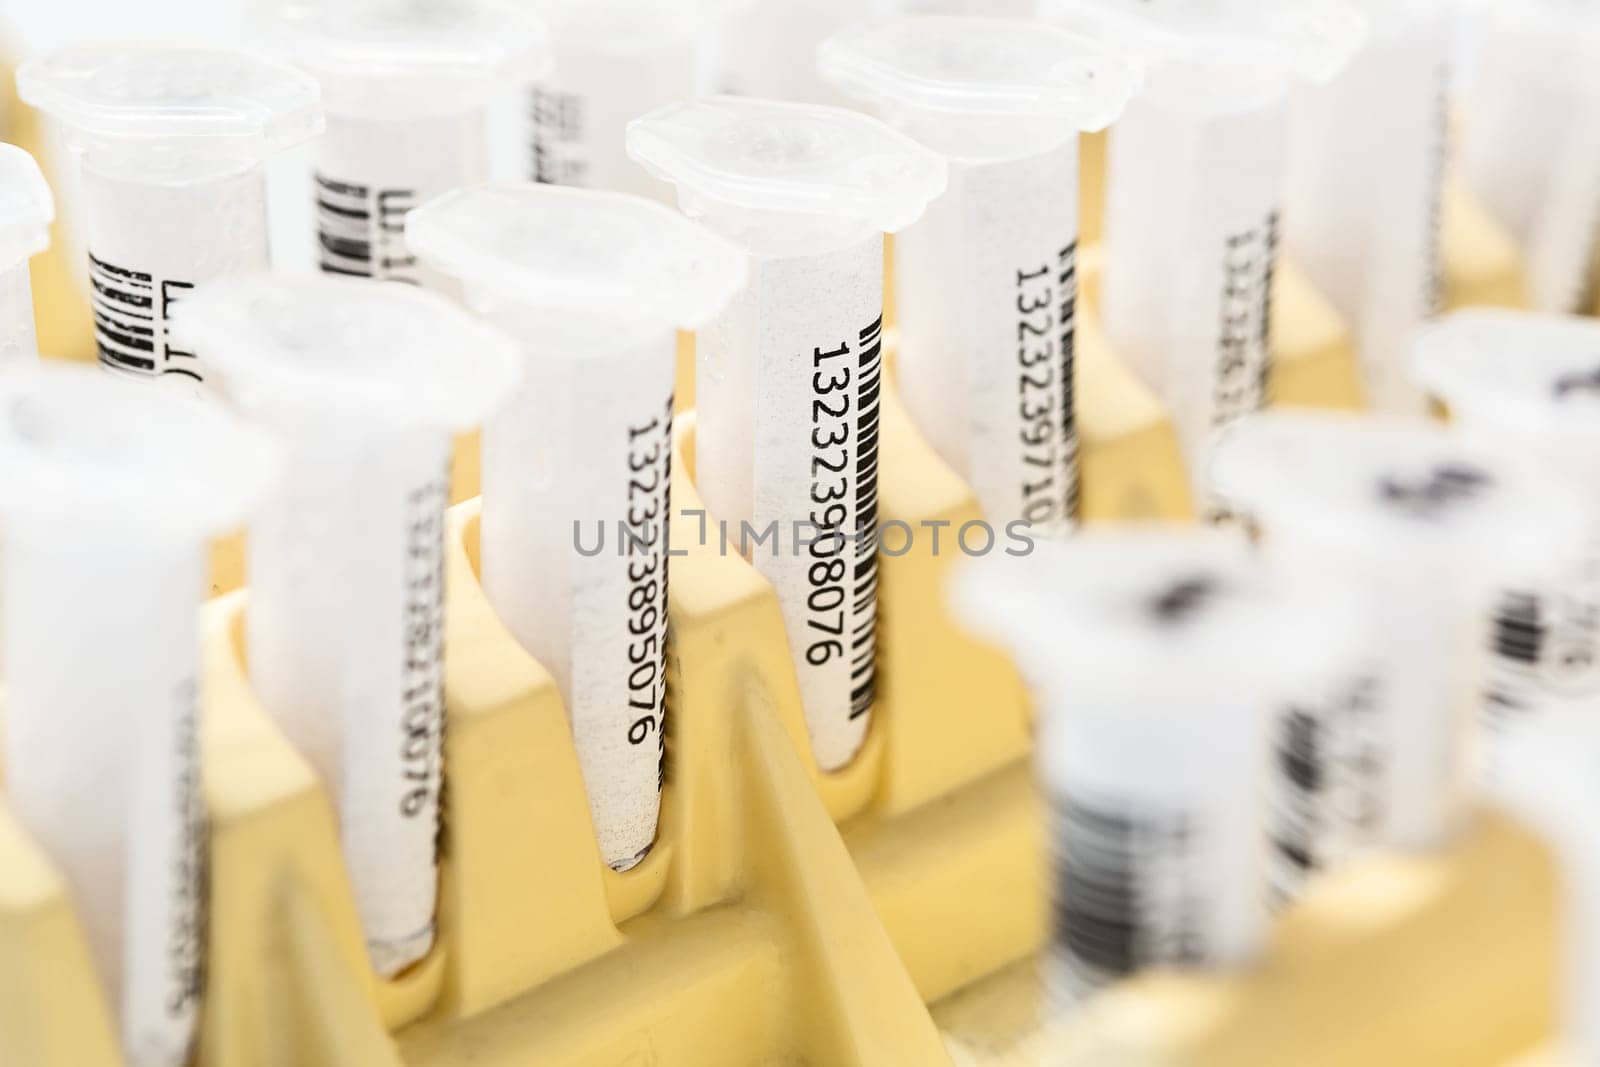 Test tubes arranged on medical trolley. Medical research